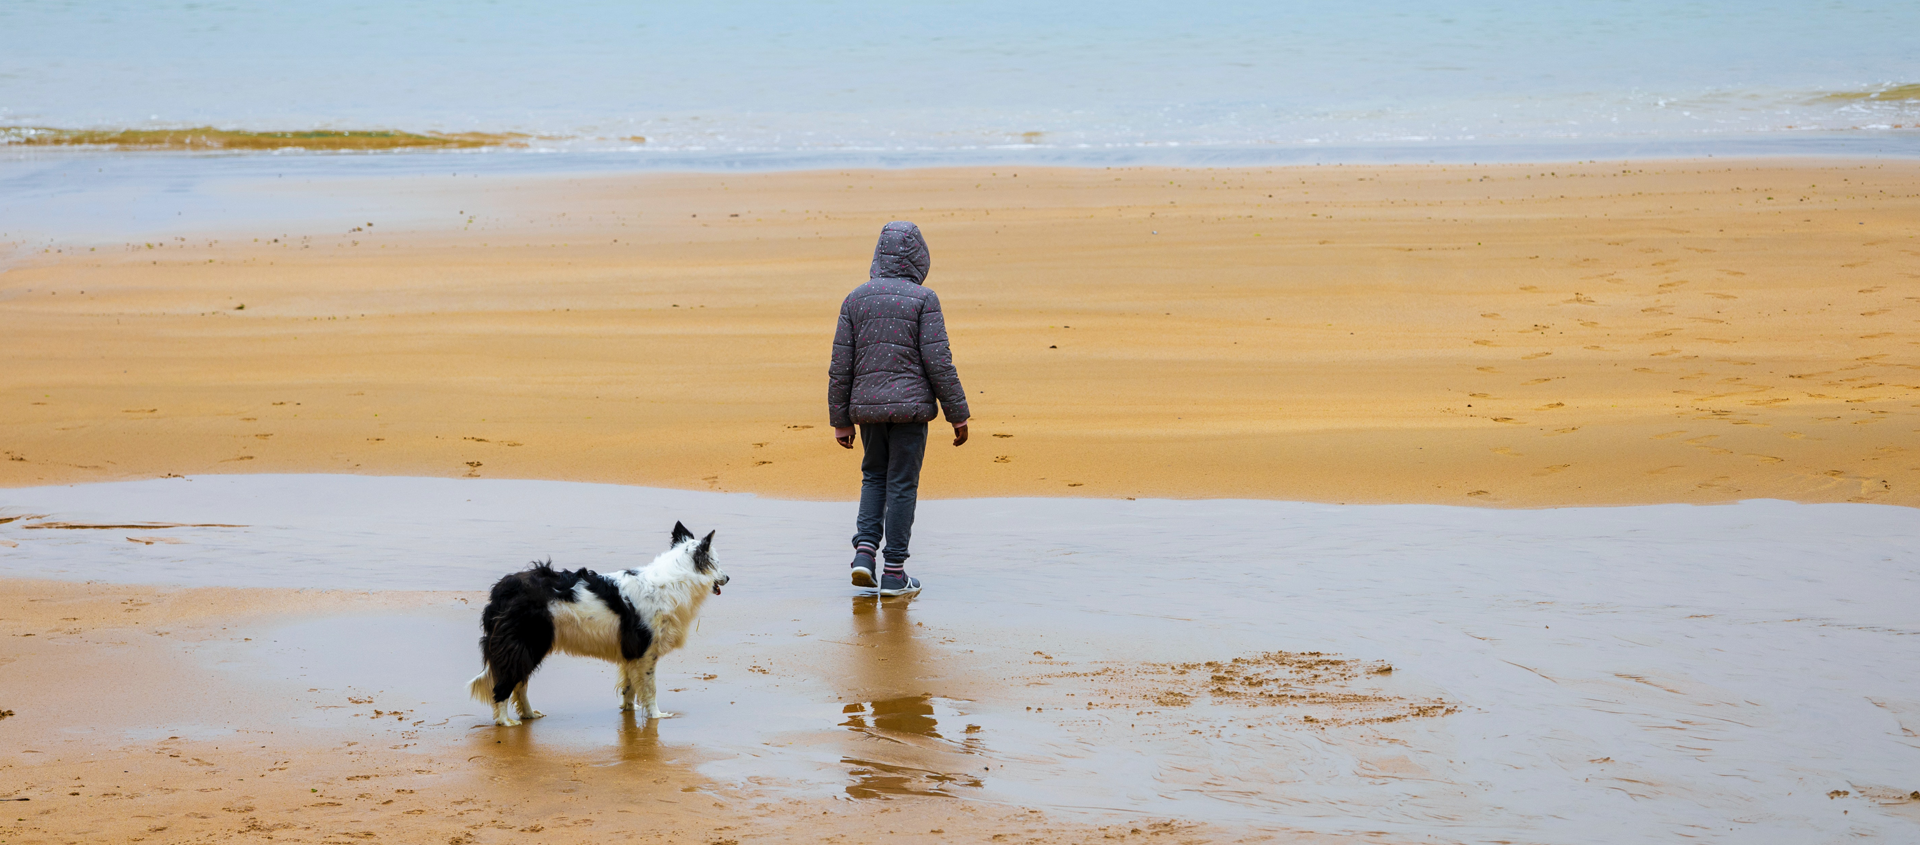 A child stands alone on a beach with a dog